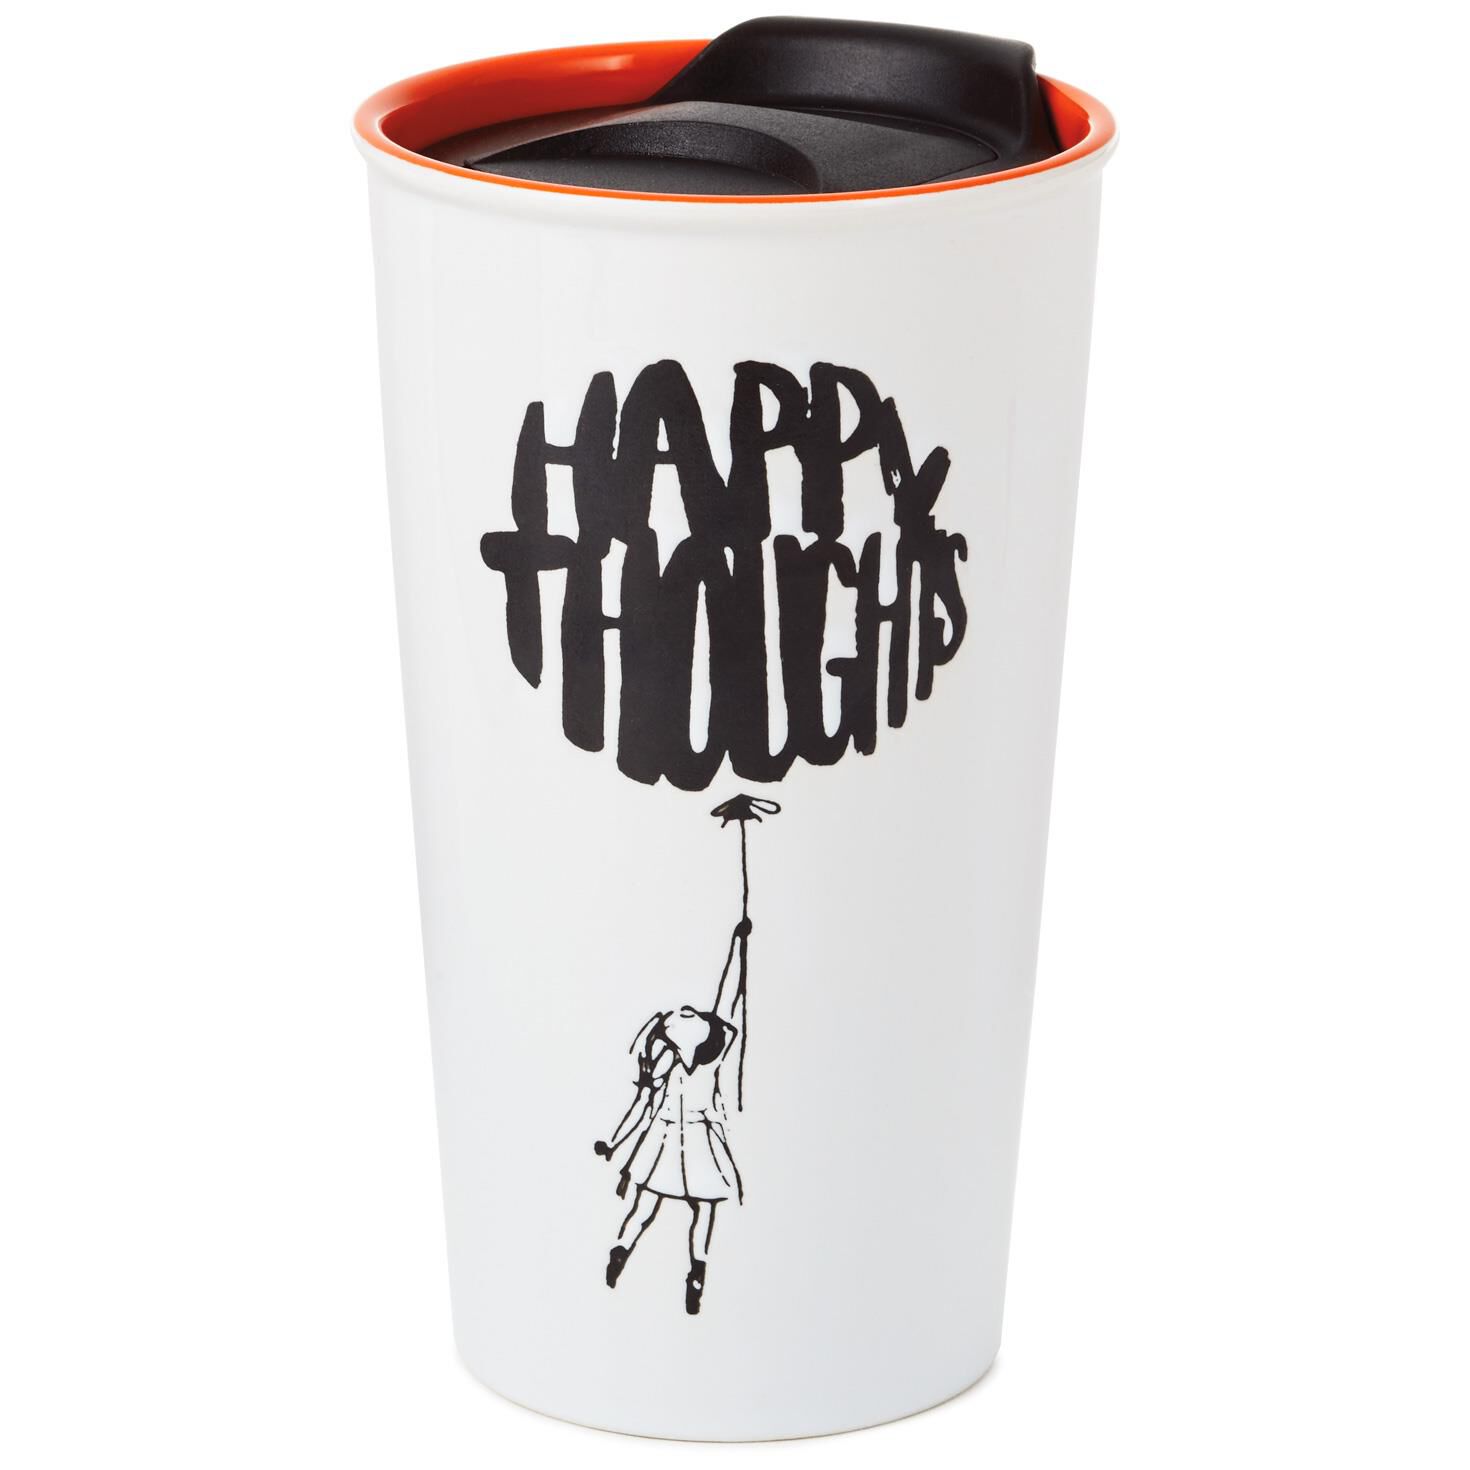 Happy Thoughts Ceramic Travel Mug With Lid, 10 oz.